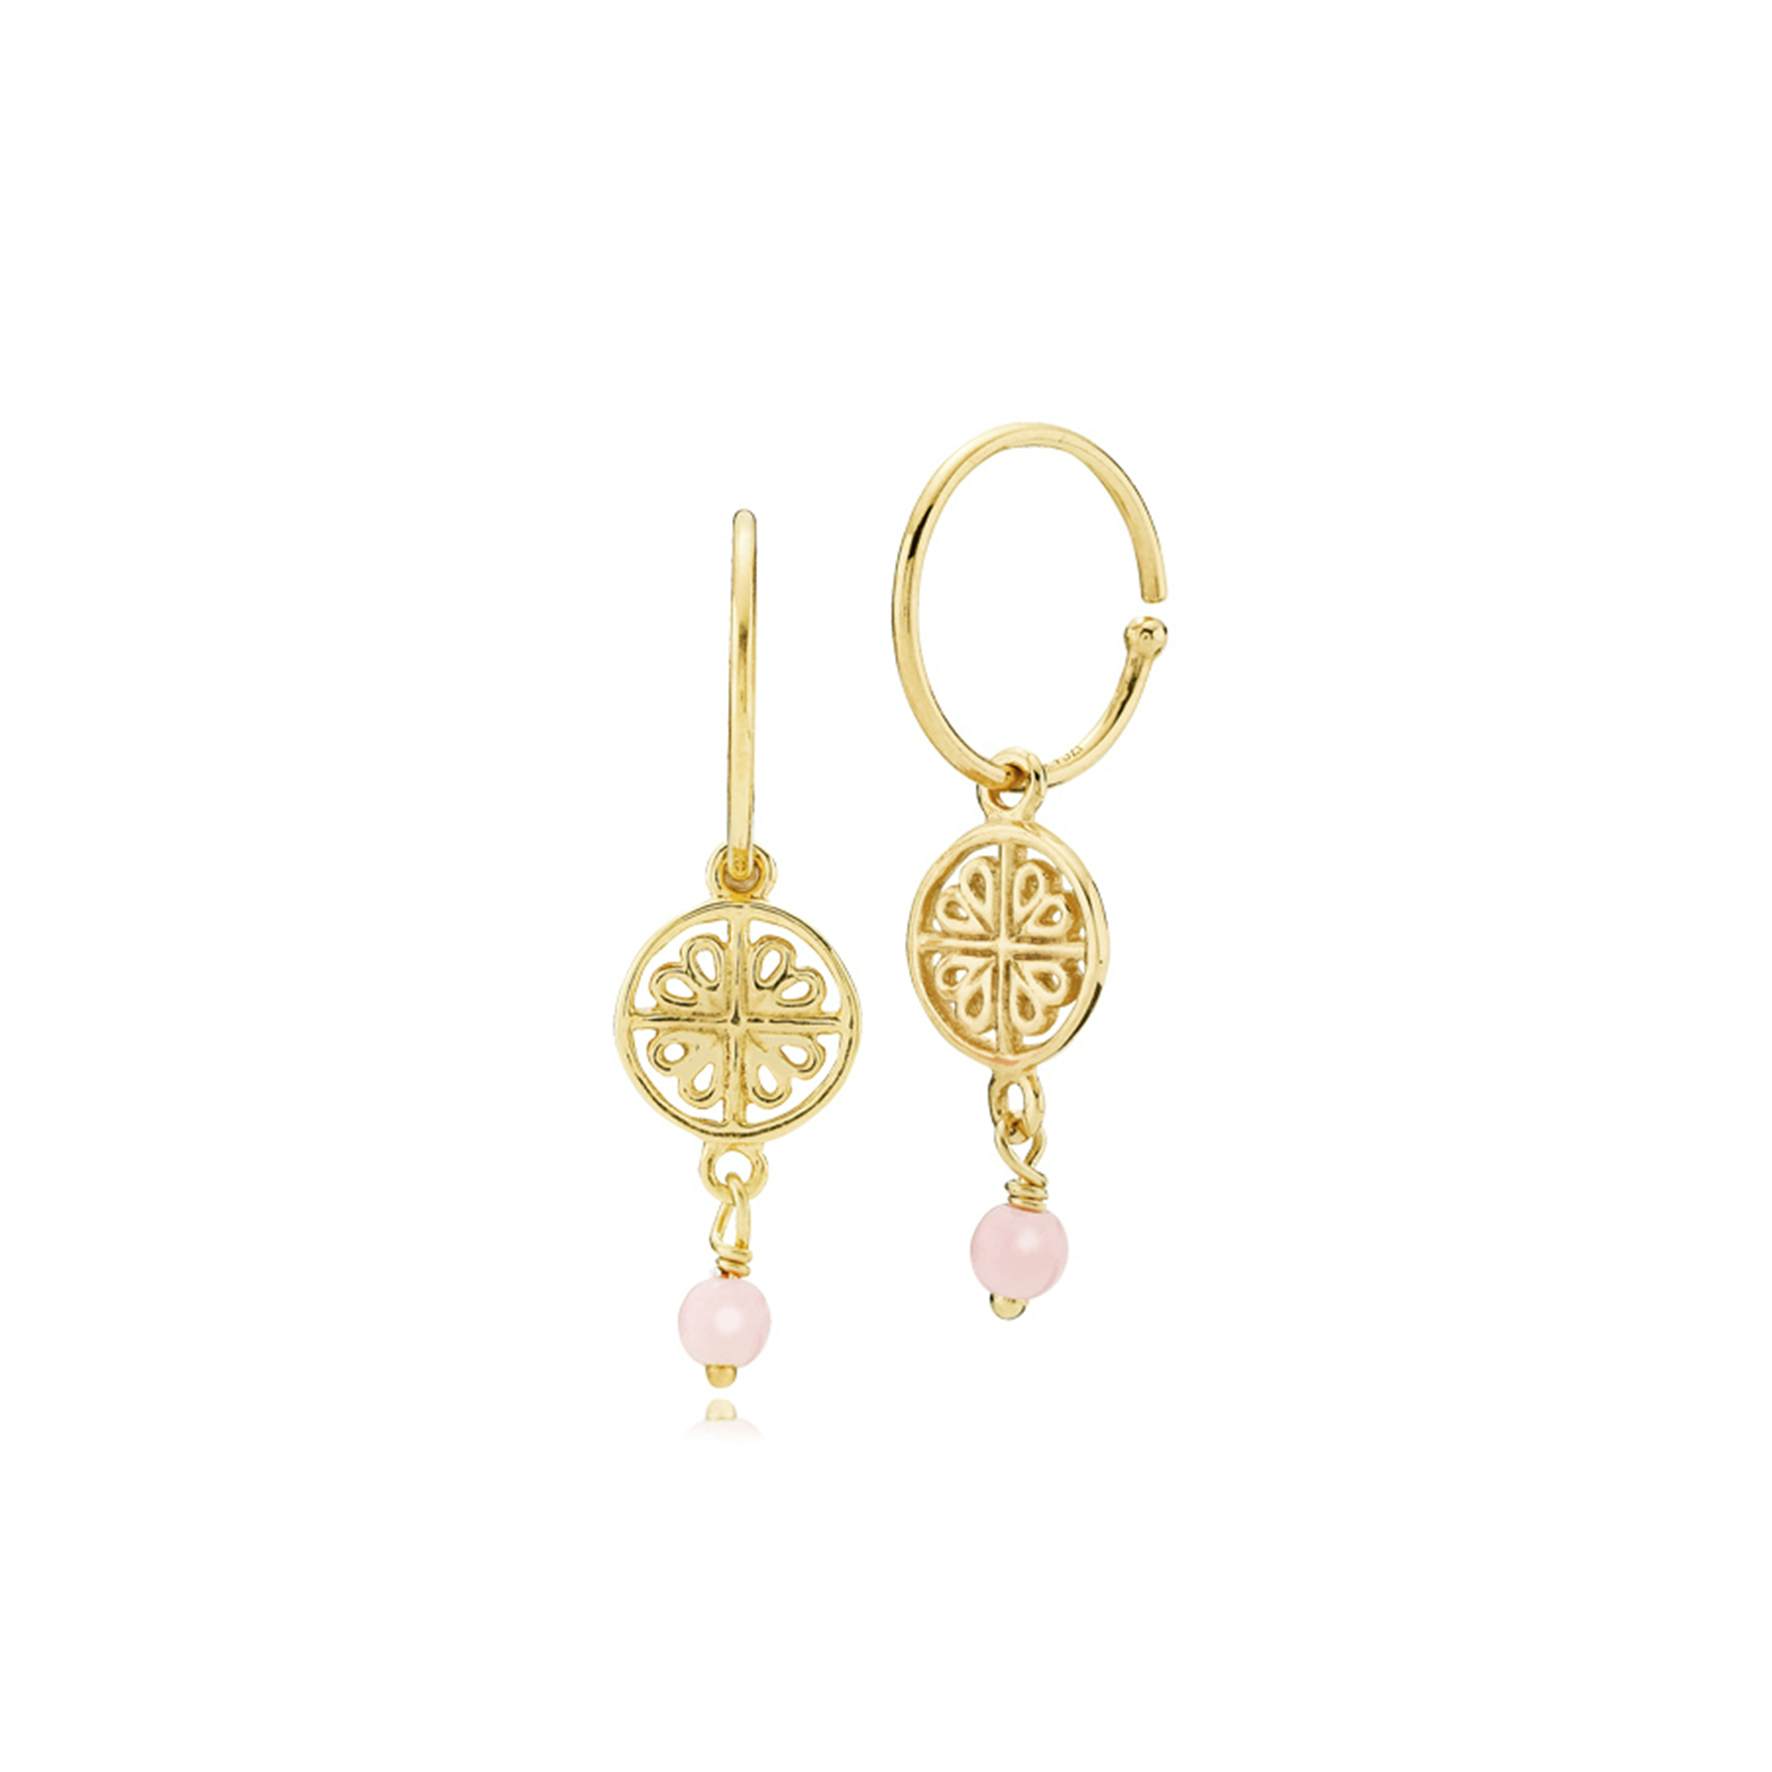 Balance Creol Earrings Pink from Sistie in Goldplated-Silver Sterling 925|Blank